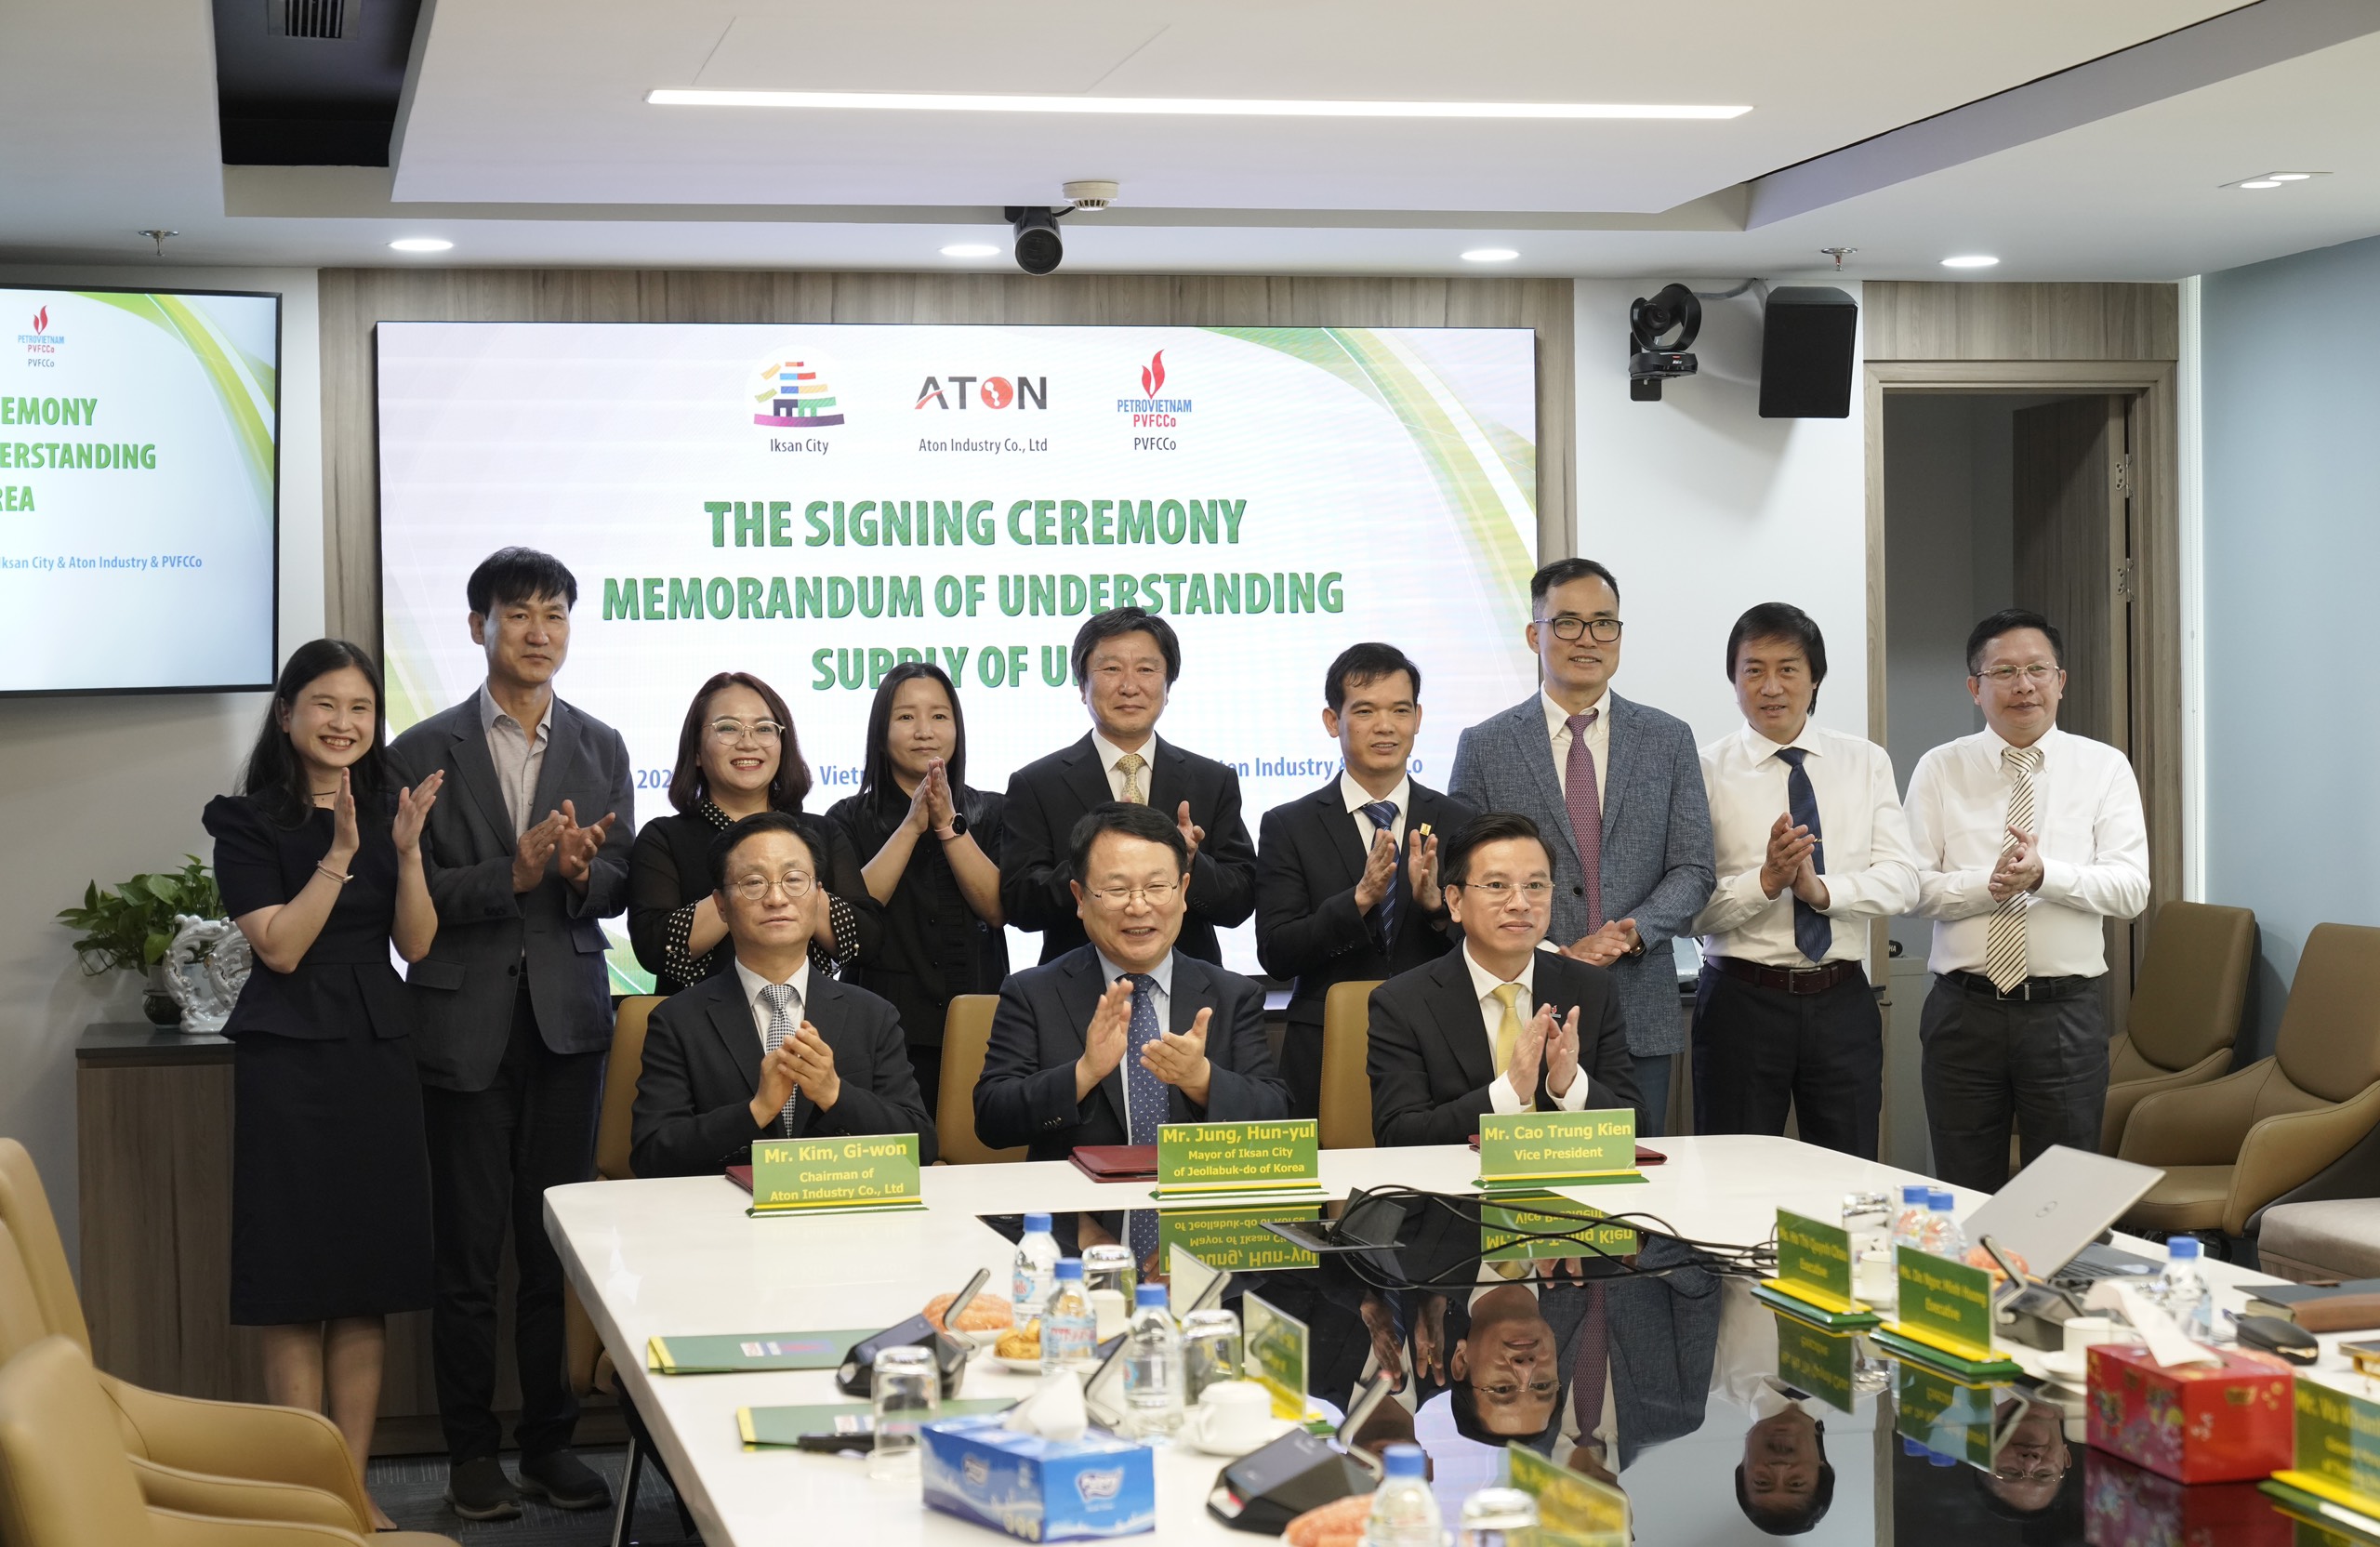 PVFCCo and South Korea partner signed a Memorandum of Understanding on the Supply of Urea.